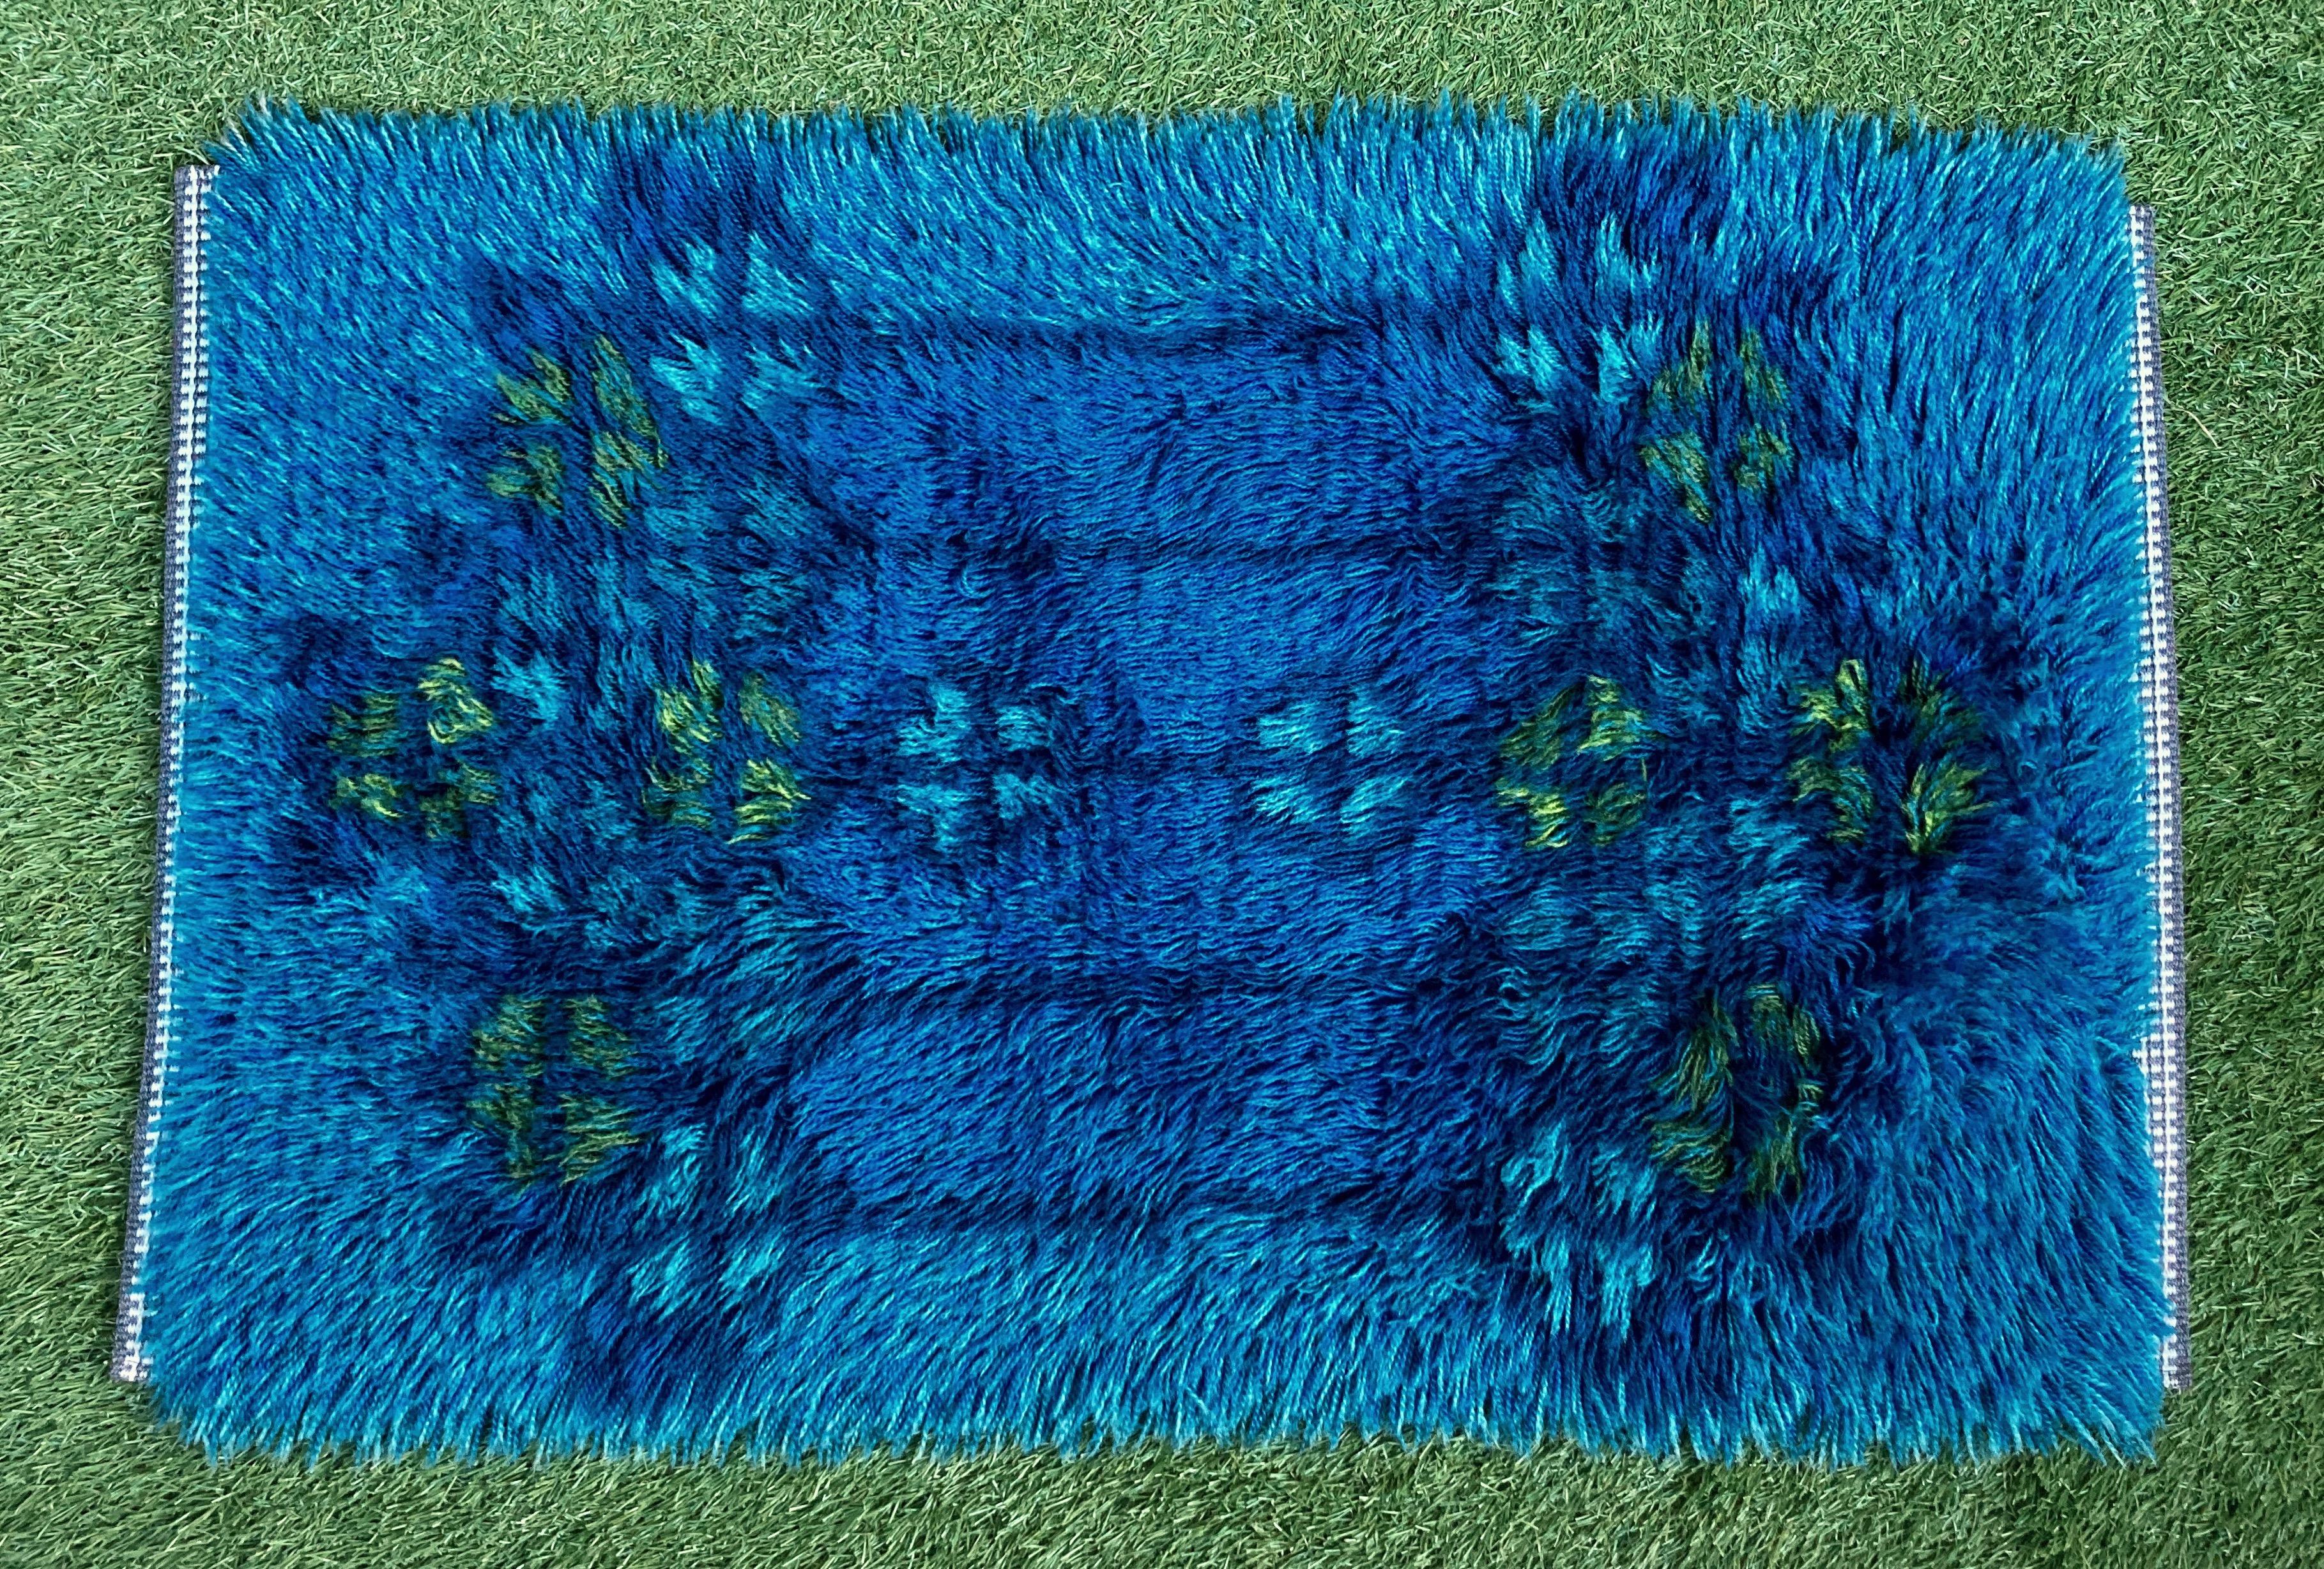 A silky midcentury high pile Scandinavian rya rug or wall hanging dating, circa 1960s. The vintage rug was crafted from hand knotted wool in several shades of blue with yellow and green accents creating a pattern with strong secessionist and Celtic